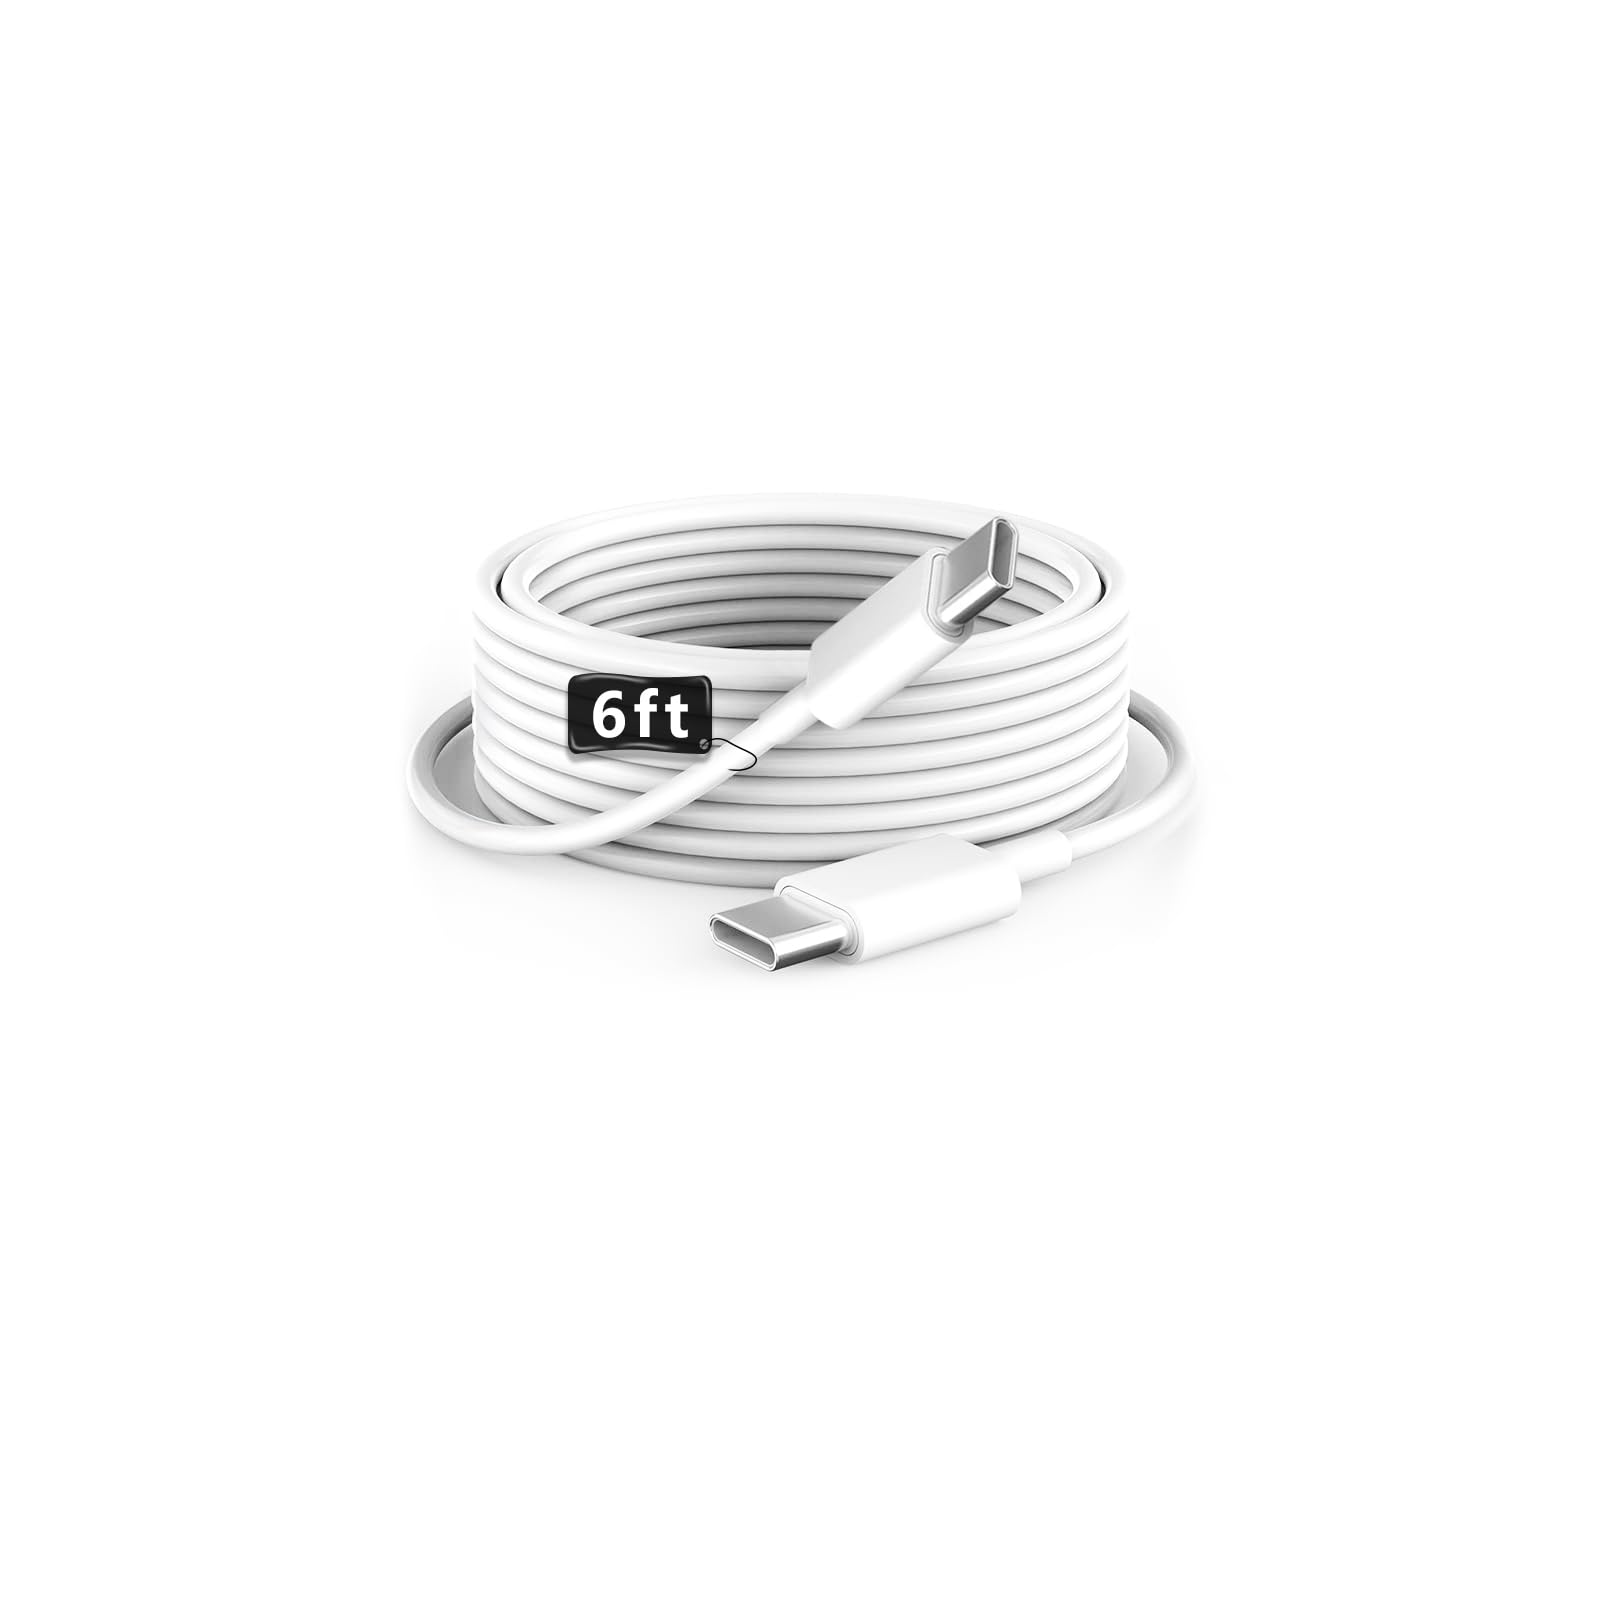 GKW USBC Cable for iPhone 15 Plus Cord USB-C Cable 6ft Certified for iPad Air/iPad/iPad Pro/iPad Mini/iPhone 15 with USB-C Port,White 1Pack